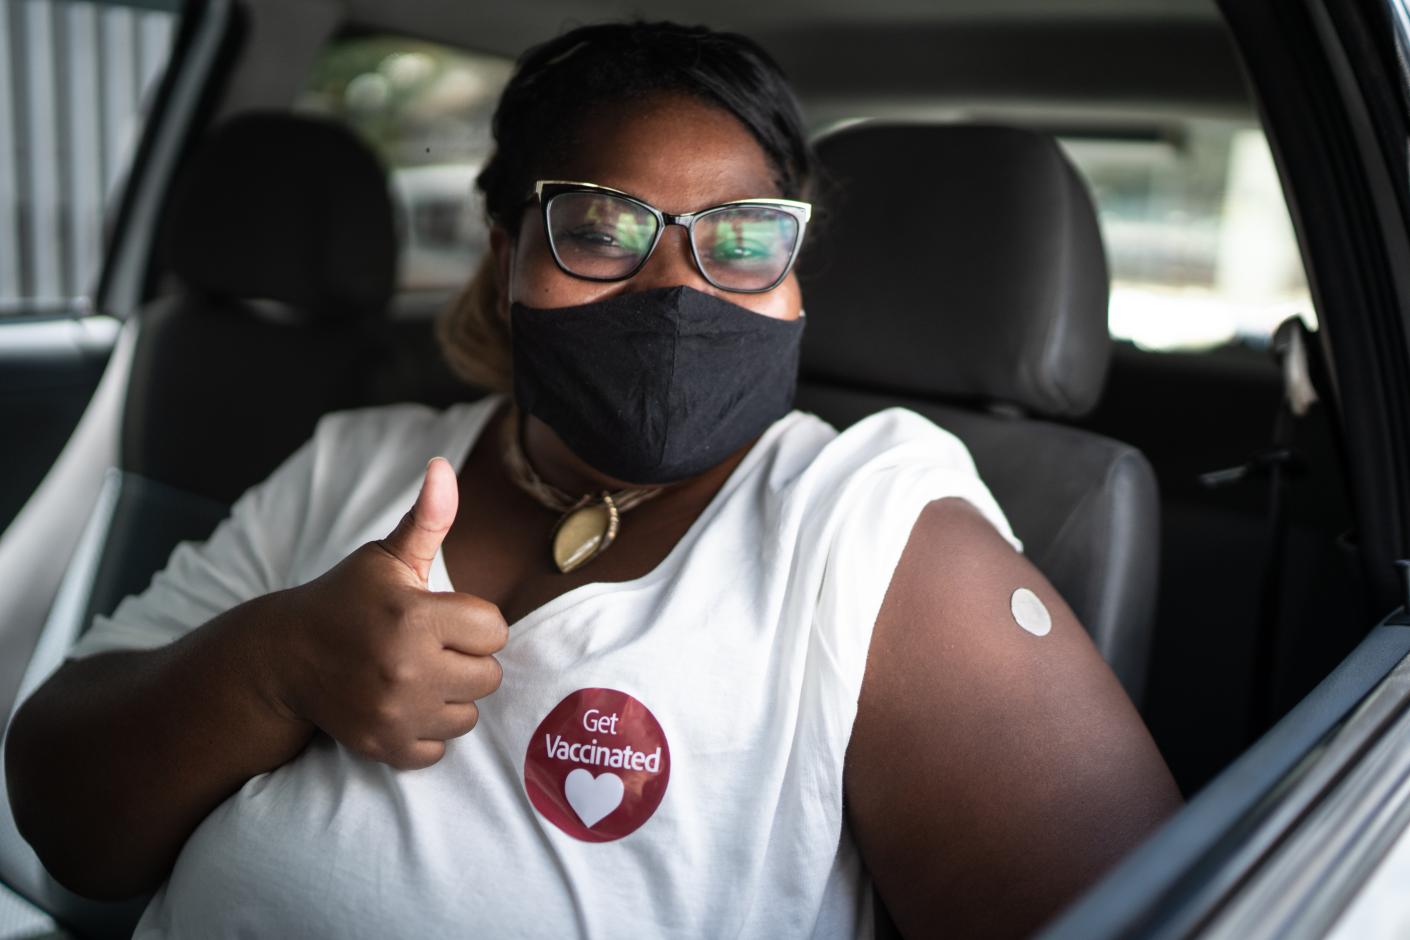 Woman with thumbs up and "Get Vaccinated" sticker